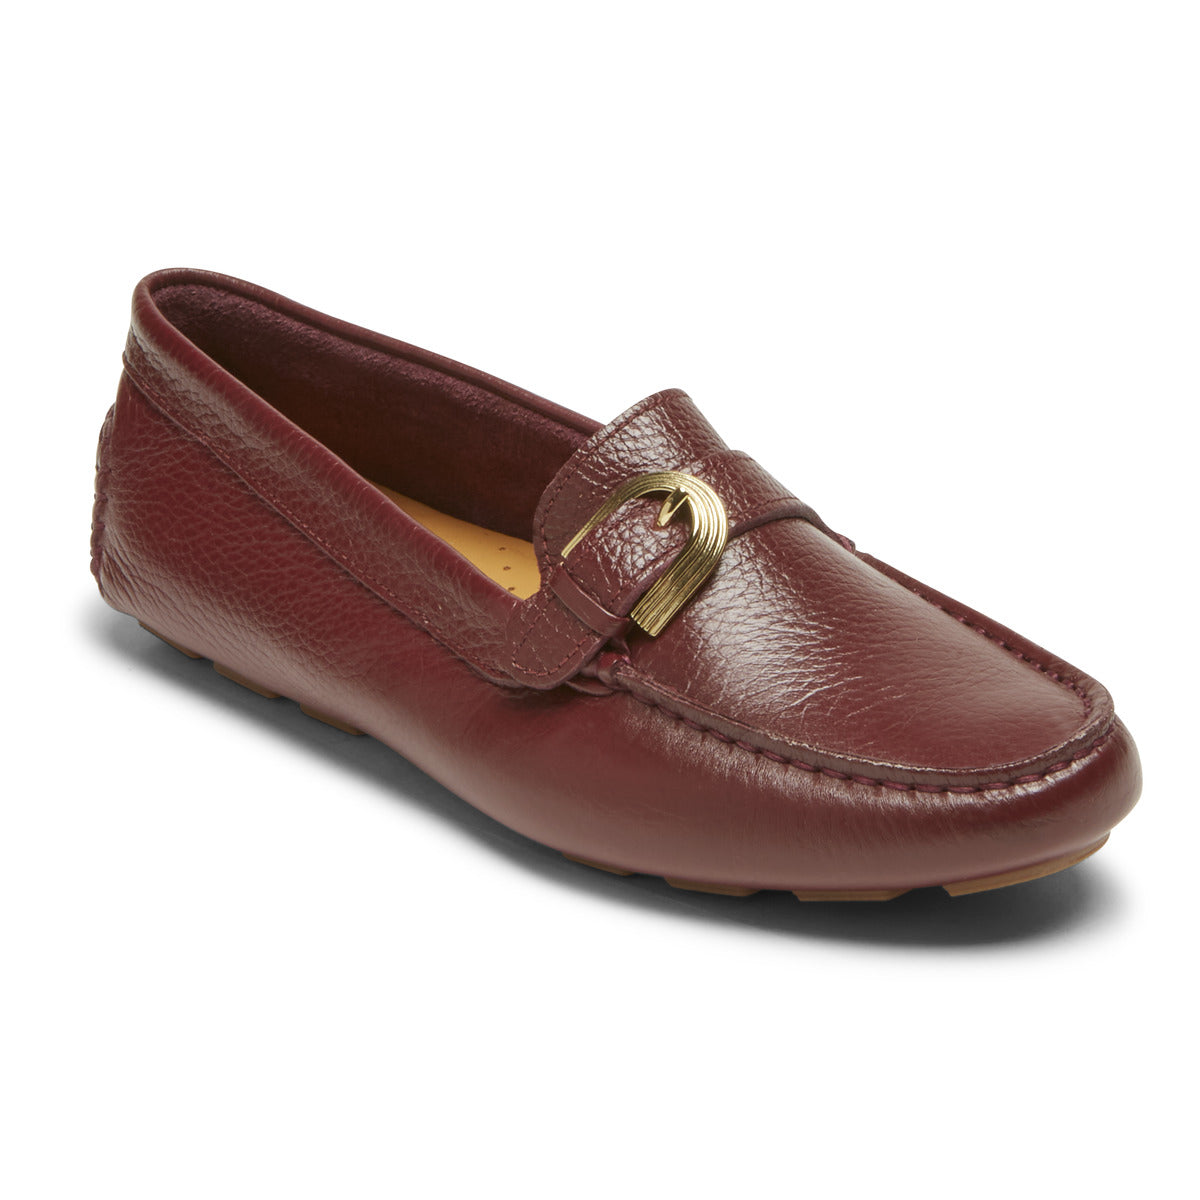 Rockport Womens Bayview Buckle Loafer